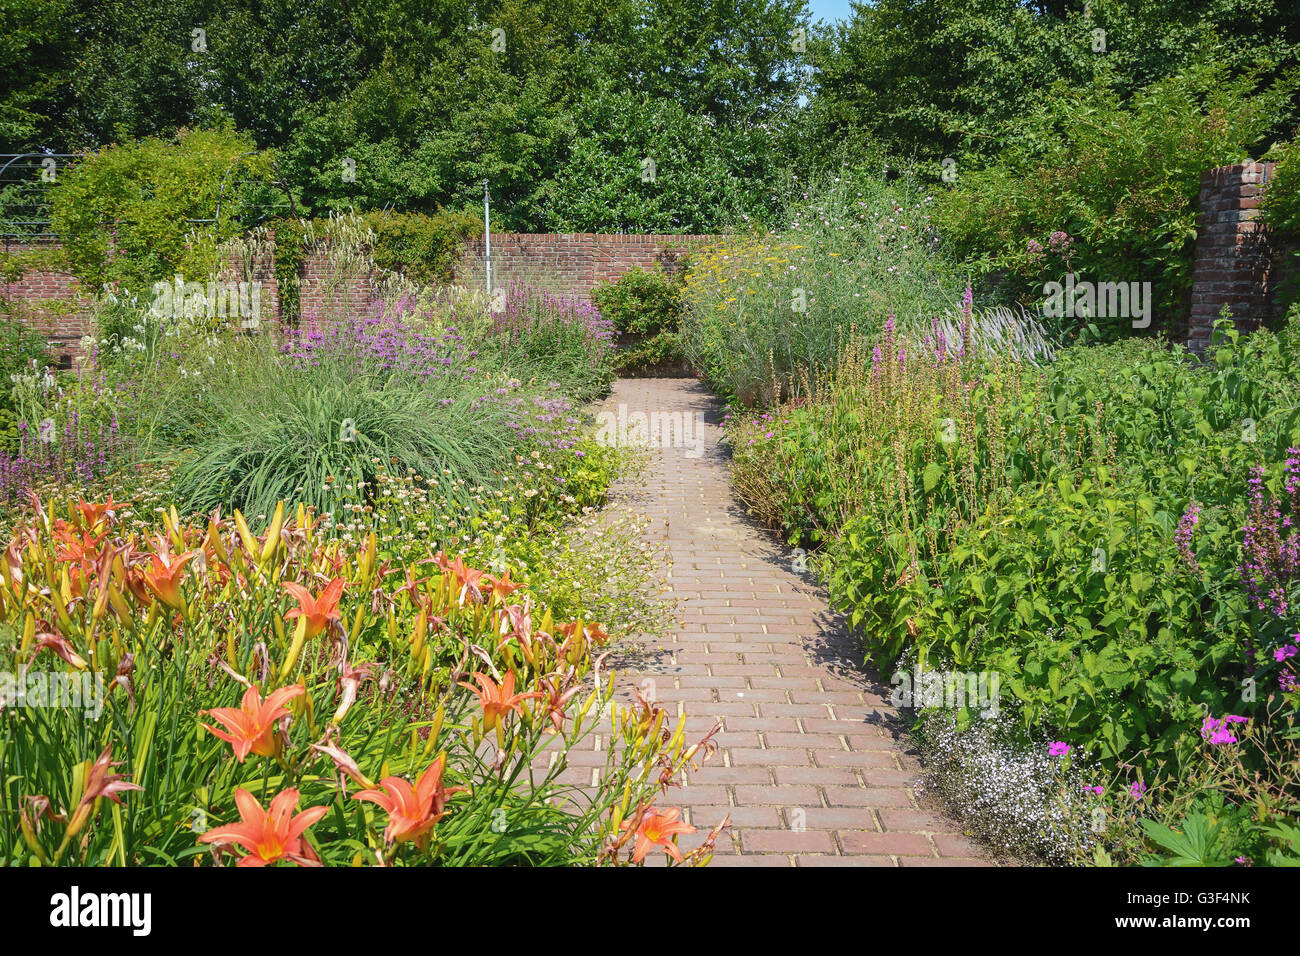 Decorative garden path surrounded by flowering plants. Stock Photo